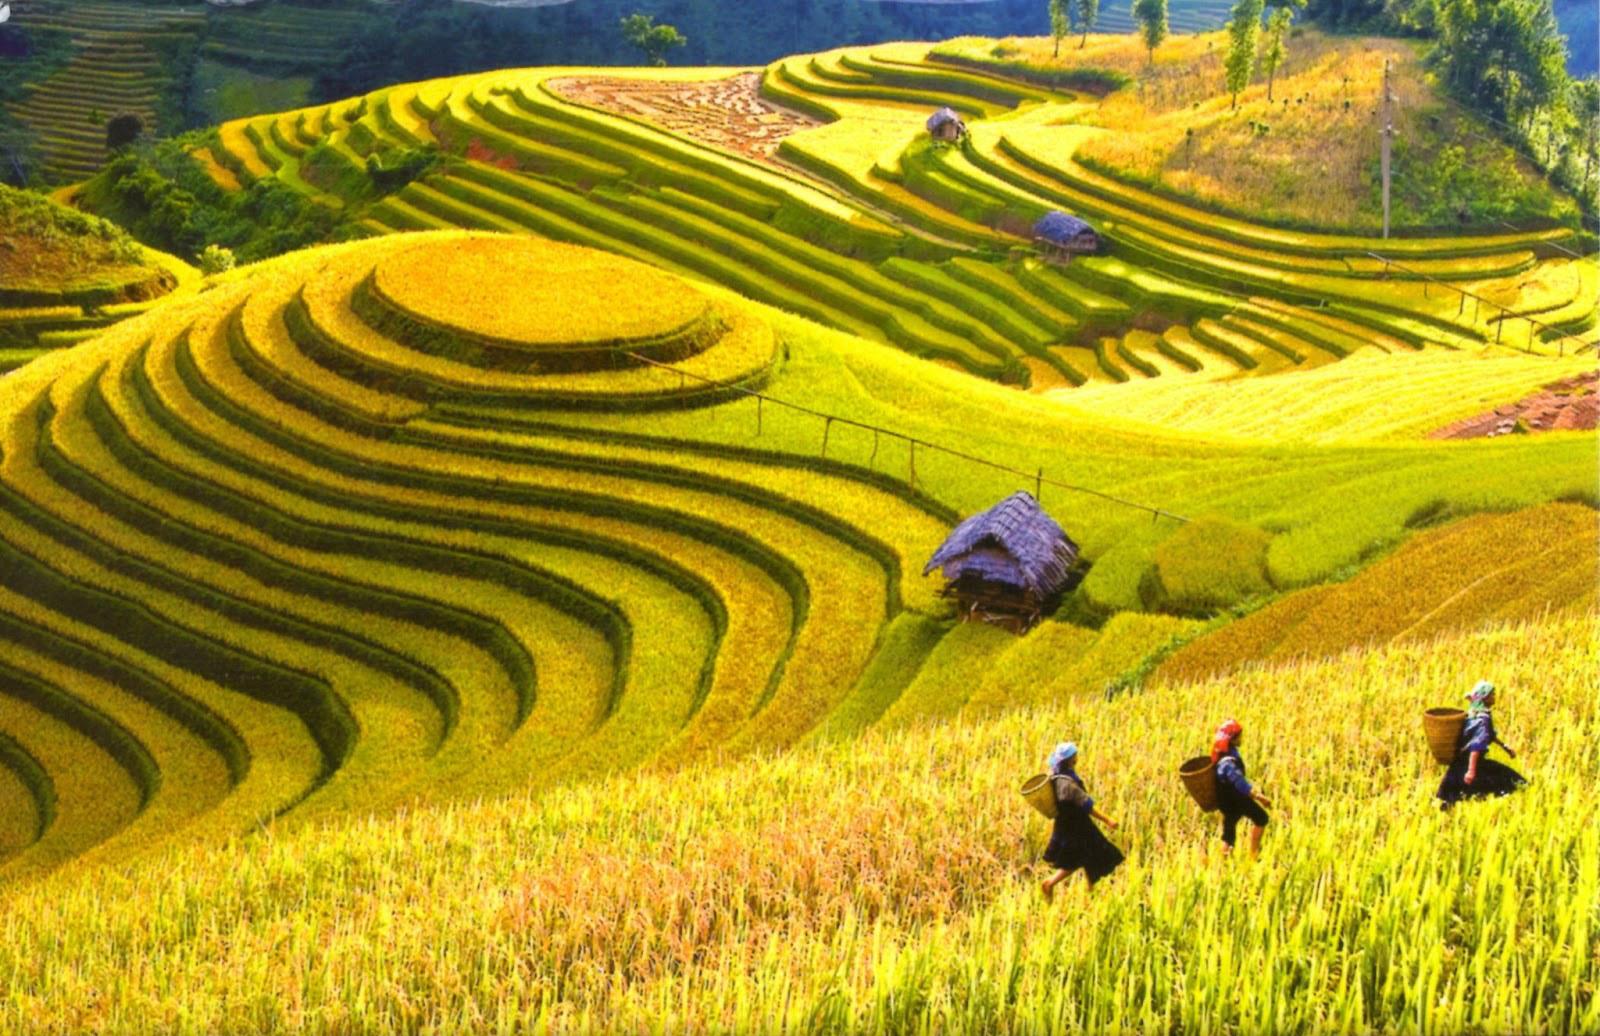 How to spend 48 hours in Sapa, VietNam